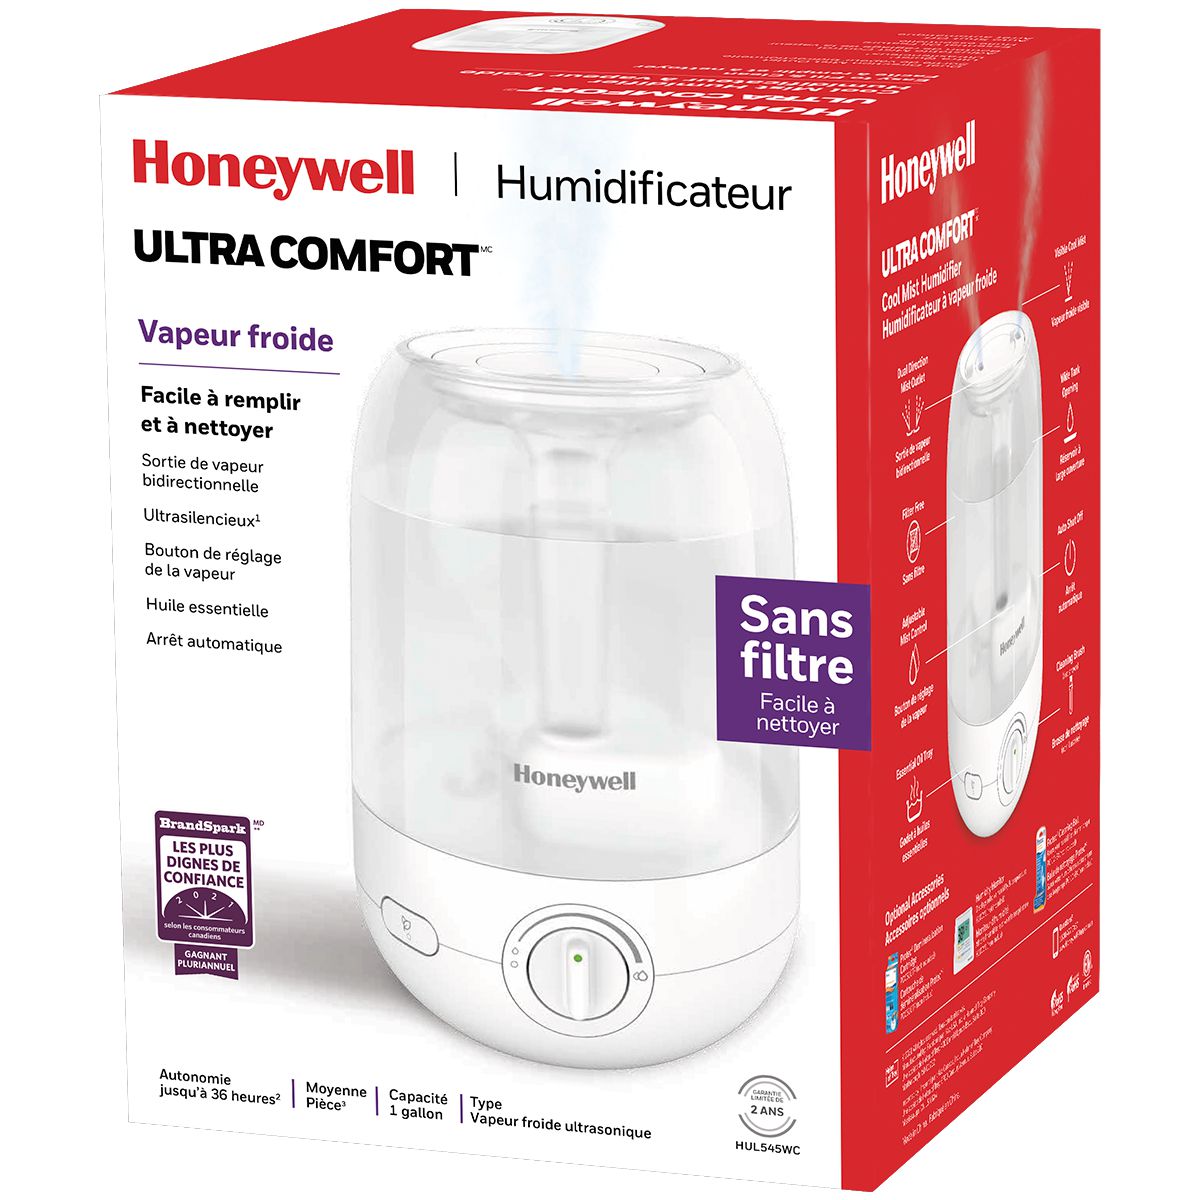 Humidificateur à vapeur froide Ultra Comfort HUL545WC Honeywell 